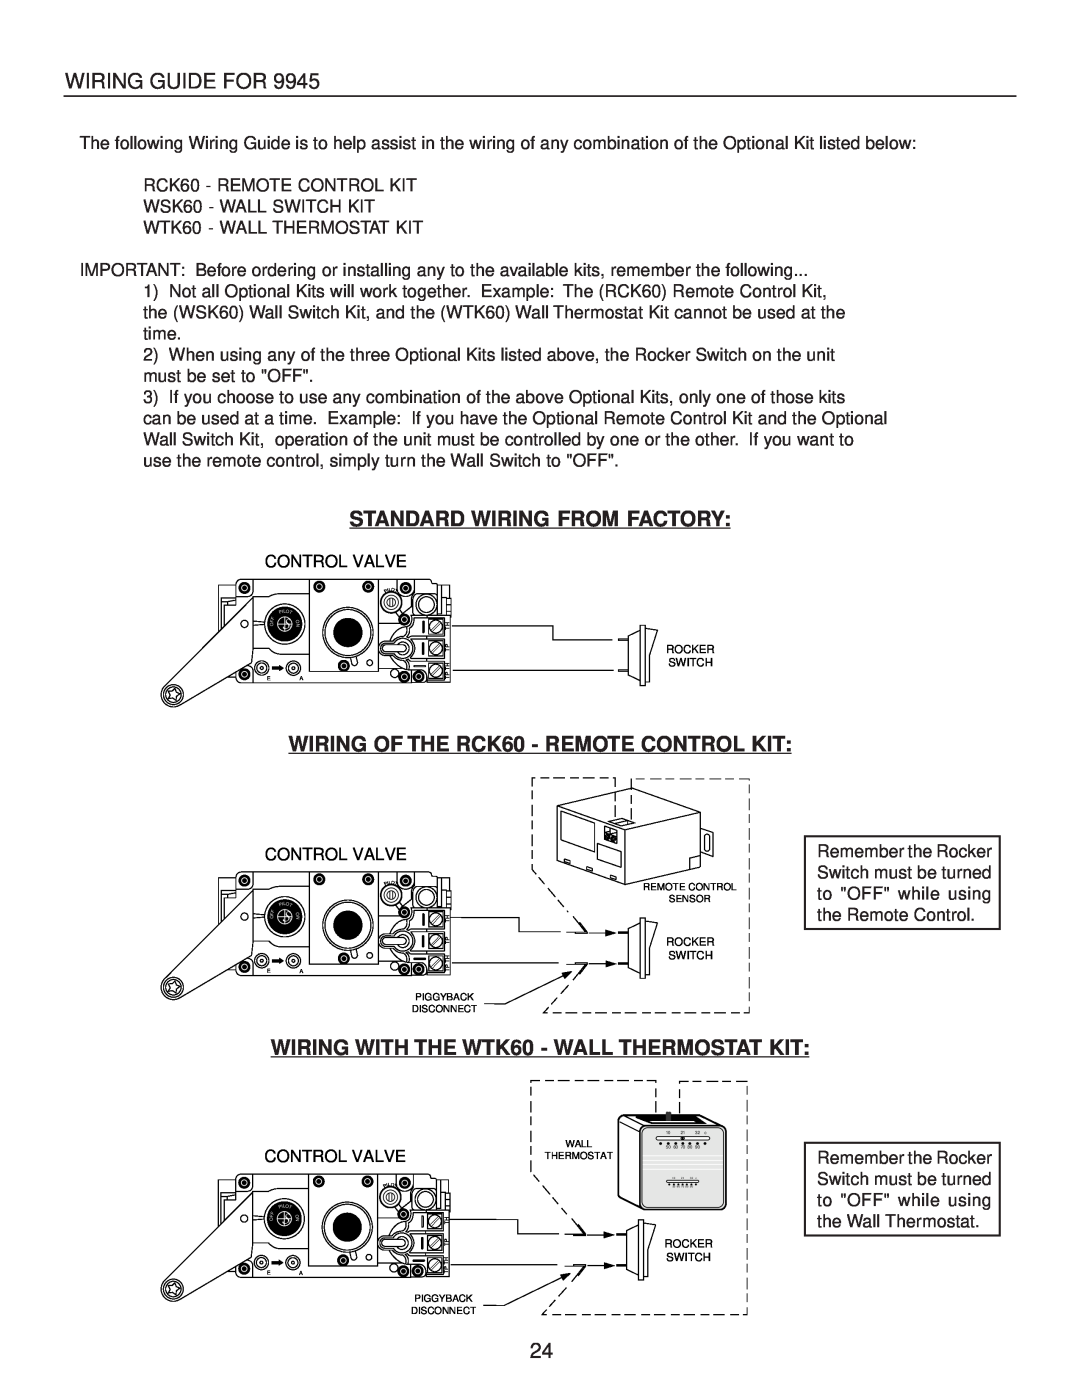 United States Stove B9945L manual Standard Wiring From Factory, WIRING OF THE RCK60 - REMOTE CONTROL KIT, Wiring Guide For 